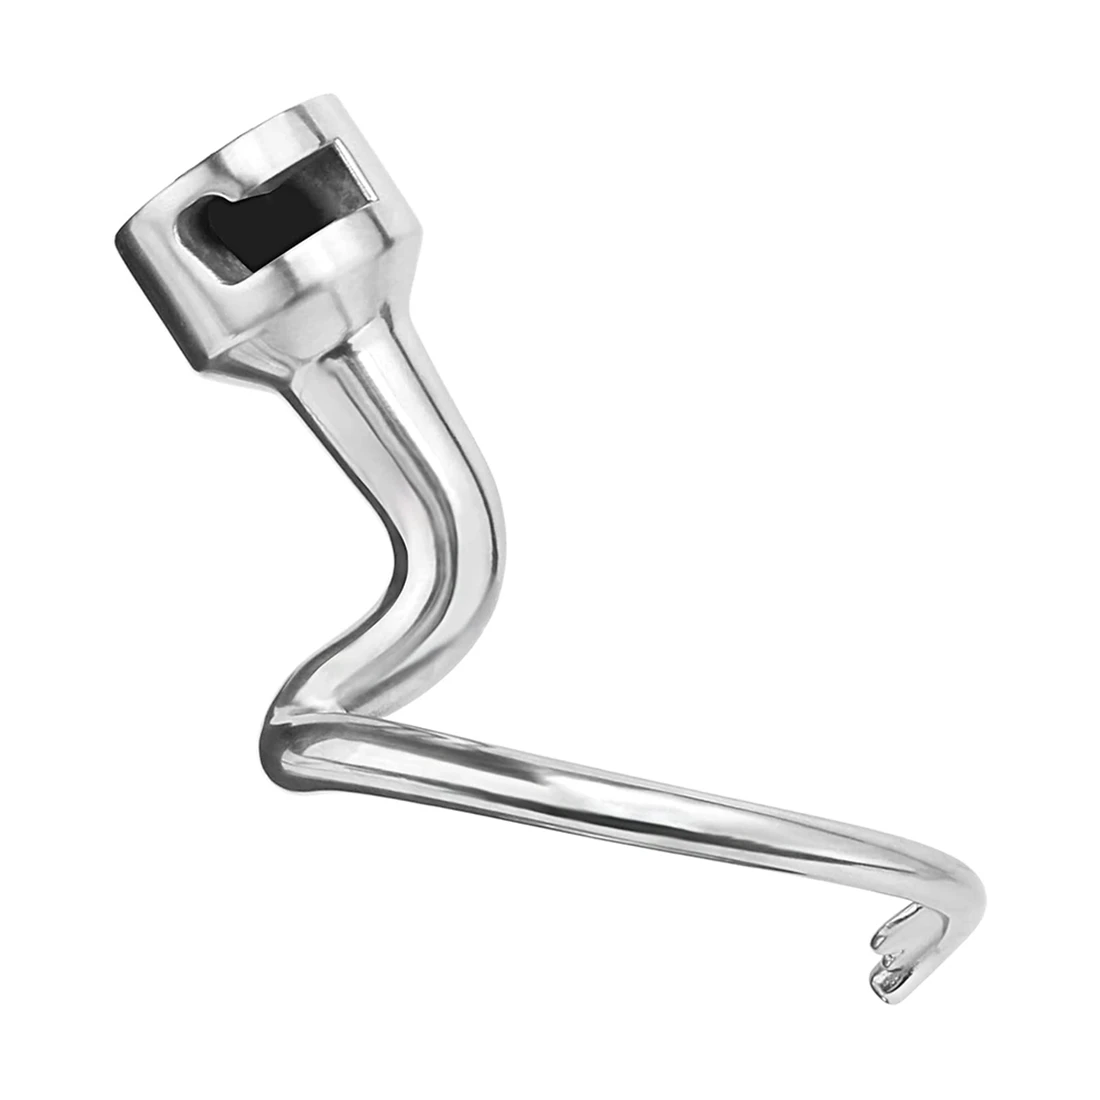 

Dough Hook Replacement for Kitchenaid Stand Mixer, Aikeec Stainless Steel K45DH Dough Hook for K45 K45SS Stand Mixers